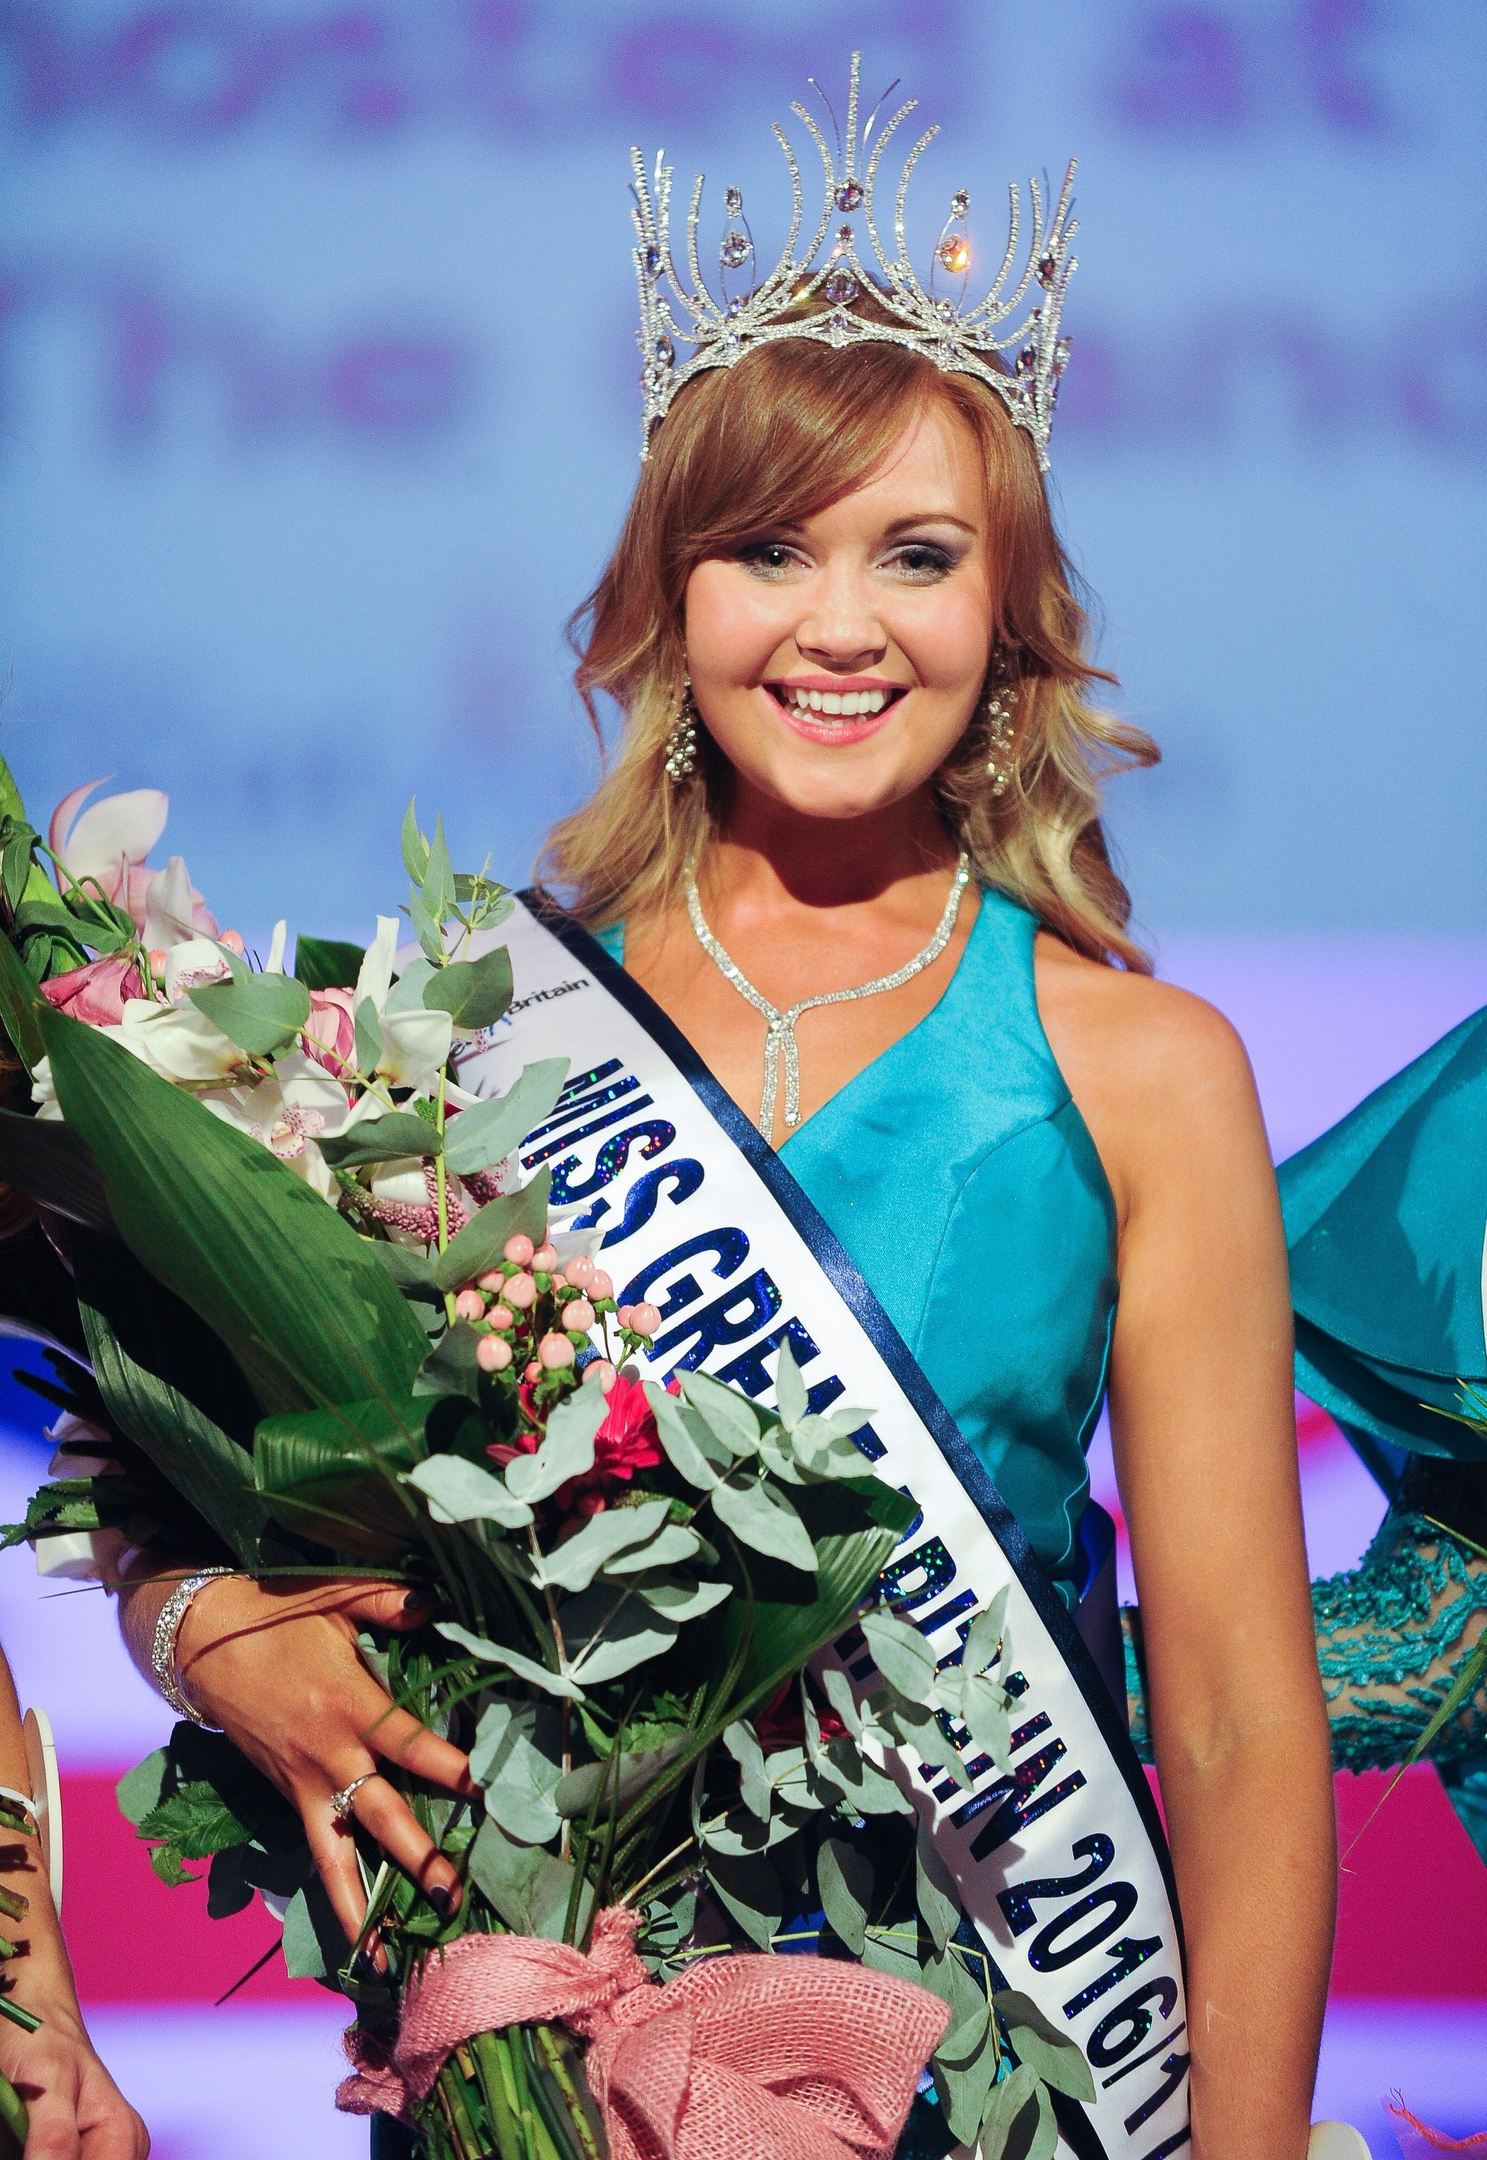 Miss Great Britain 2016 final held at Athena in Leicester. Miss Aberdeen - Ursula Carlton is crowded Miss Great Britain 2016.